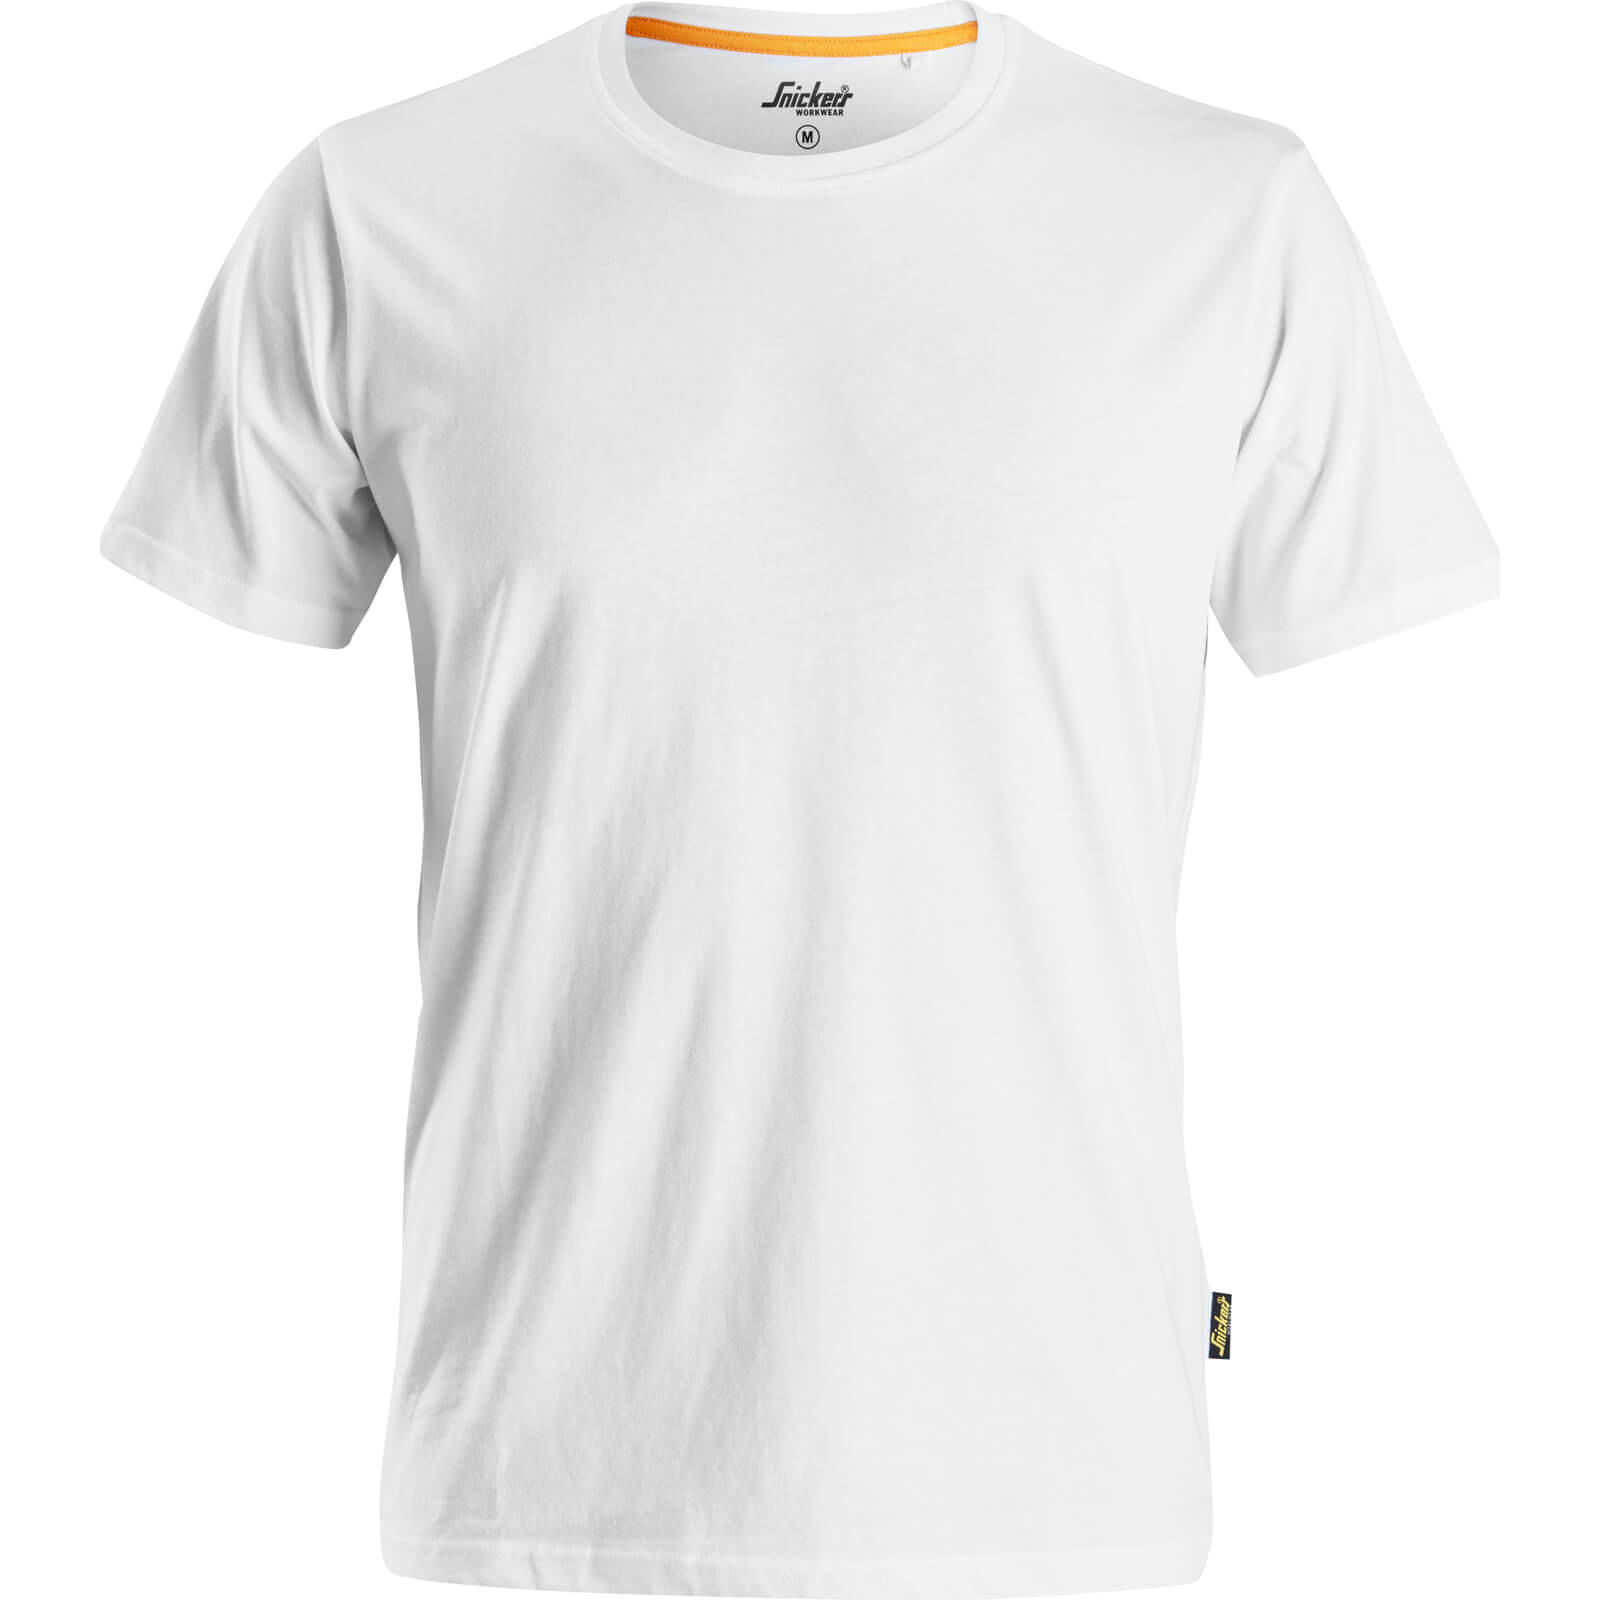 Image of Snickers Allround Work Organic Cotton T Shirt White XL